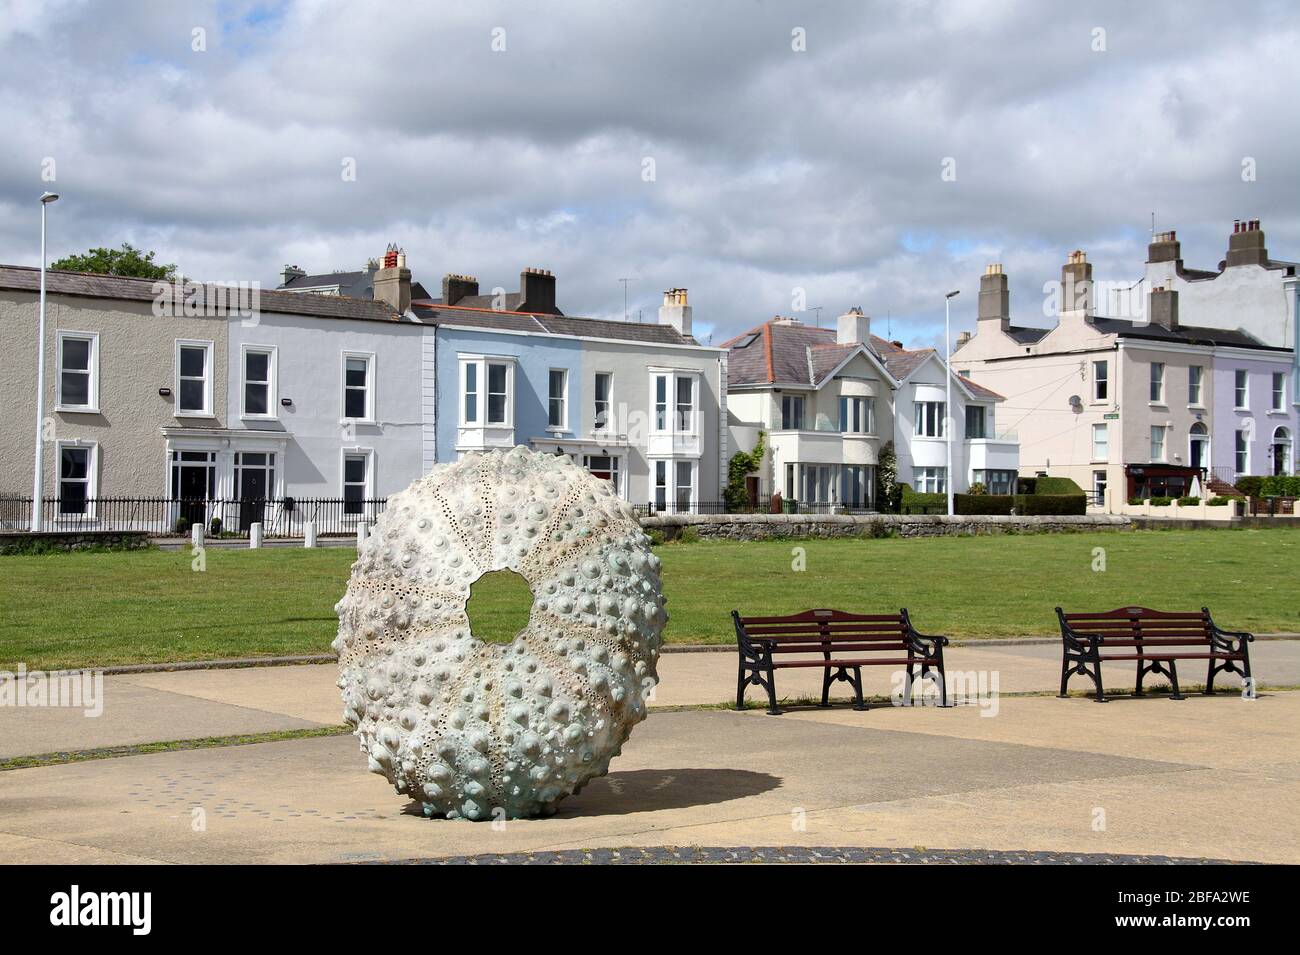 Seafront sculpture of a sea urchin called Mothership by Rachel Joynt at Newtownship in County Dublin Stock Photo